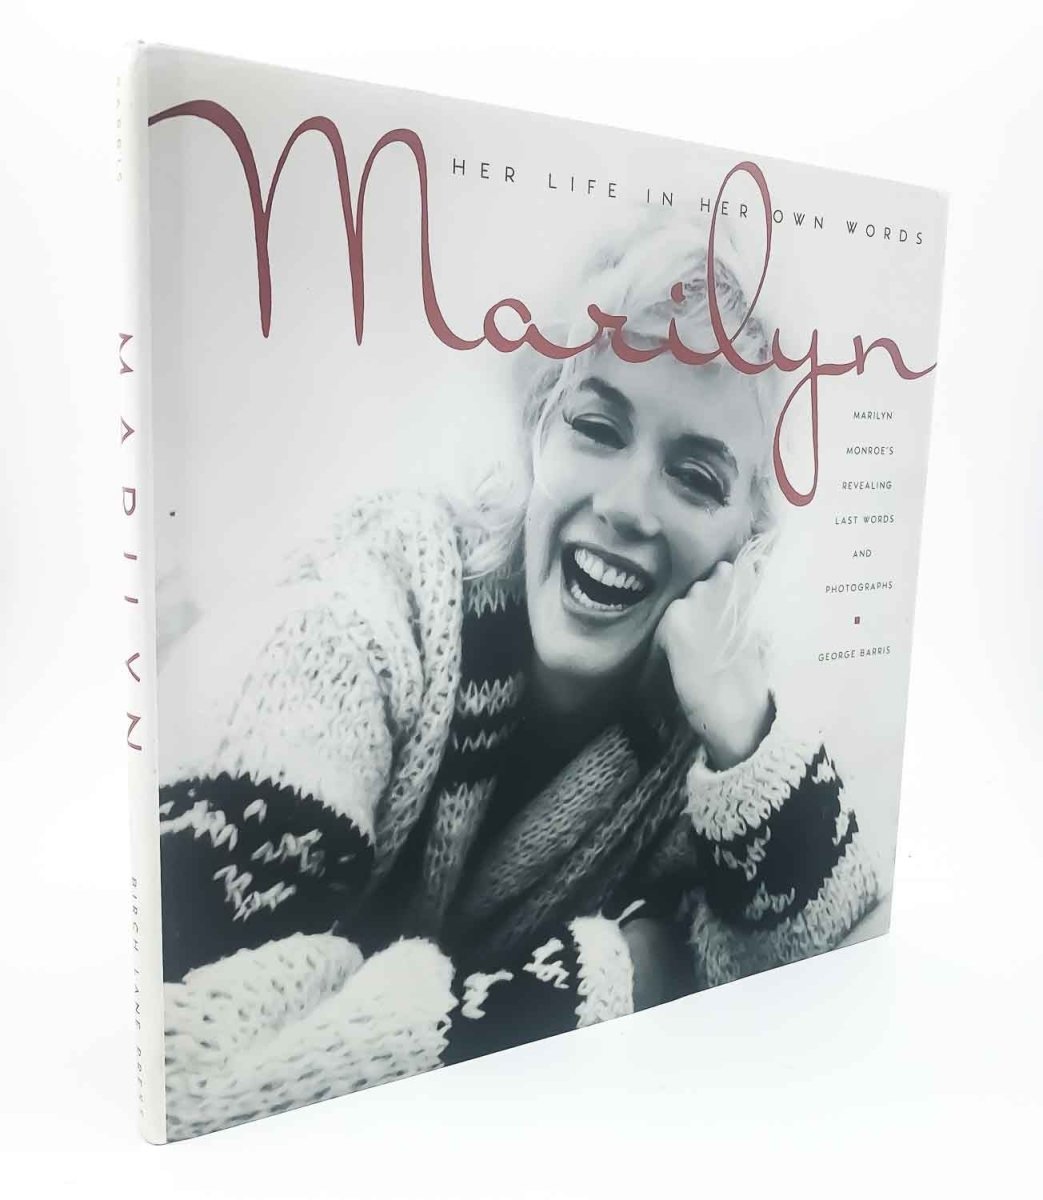 Barris, George - Marilyn : Her Life In her Own Words | image1